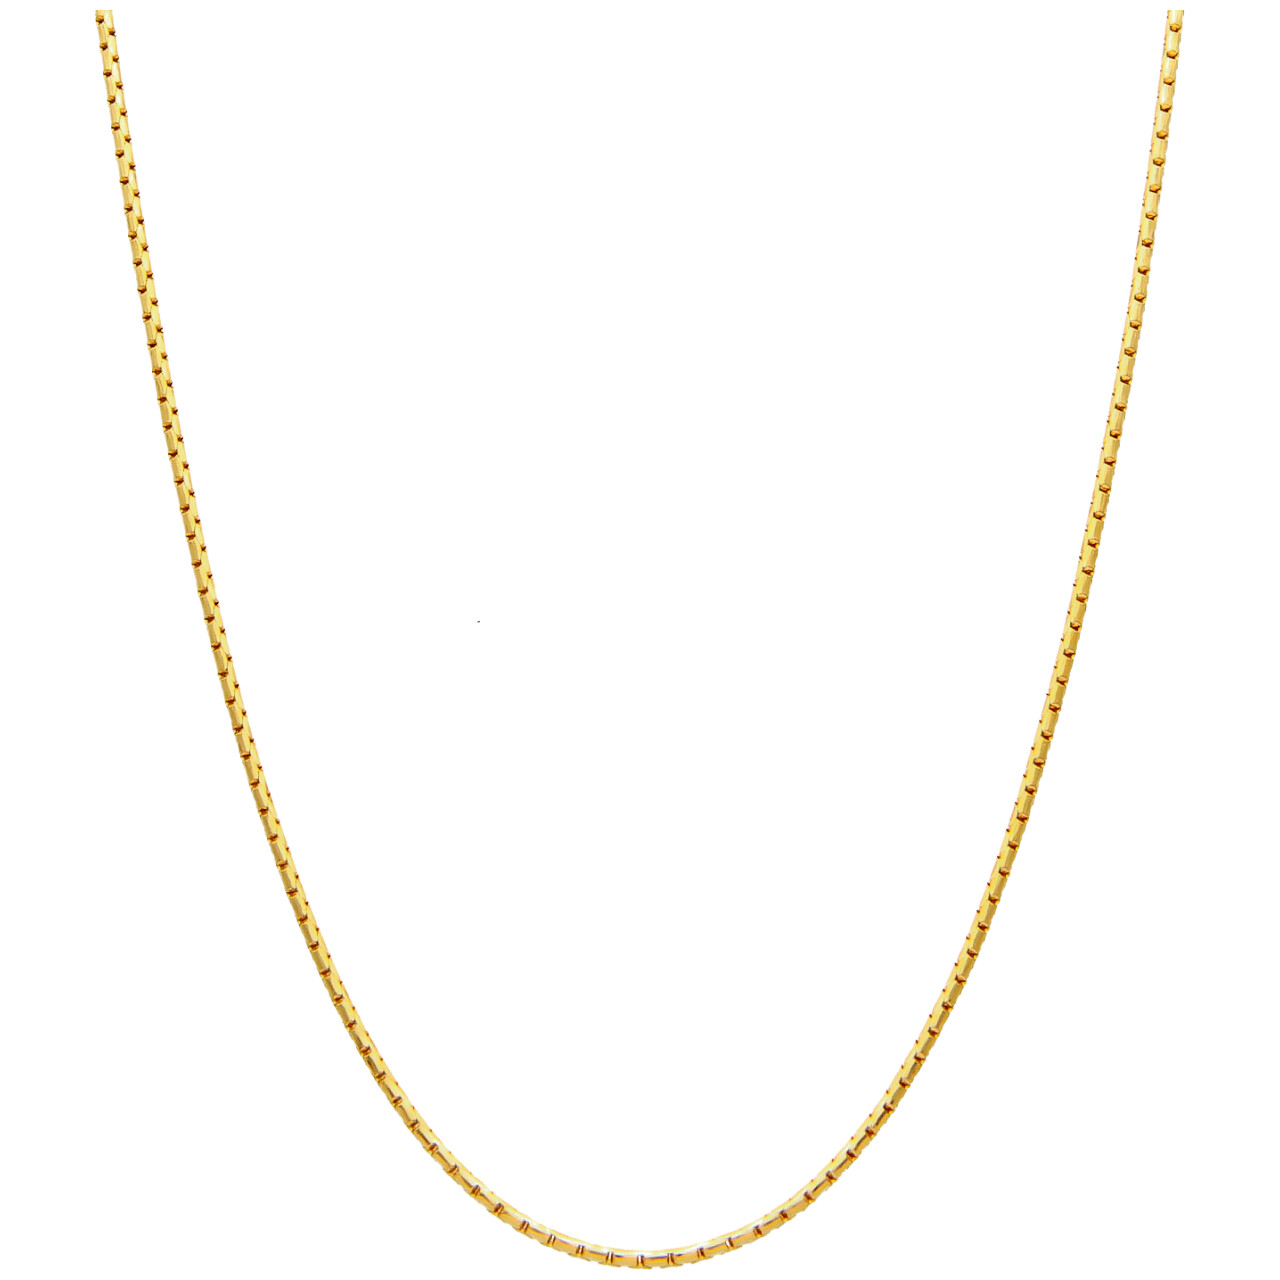 OMS yellow gold cobra chain